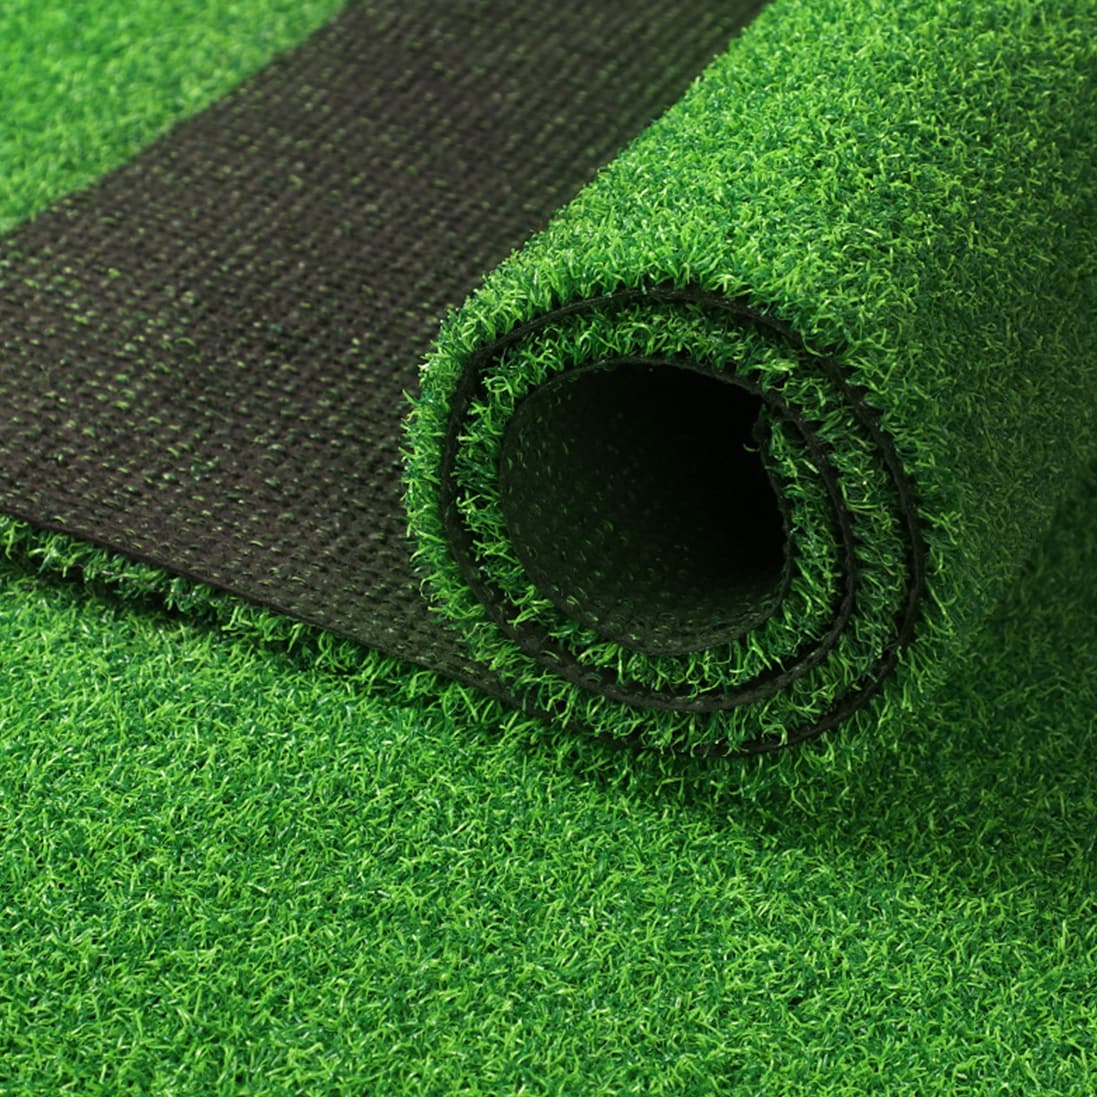 The Ultimate Guide To Premium Grass Blades: How To Choose The Best Option For Your Lawn